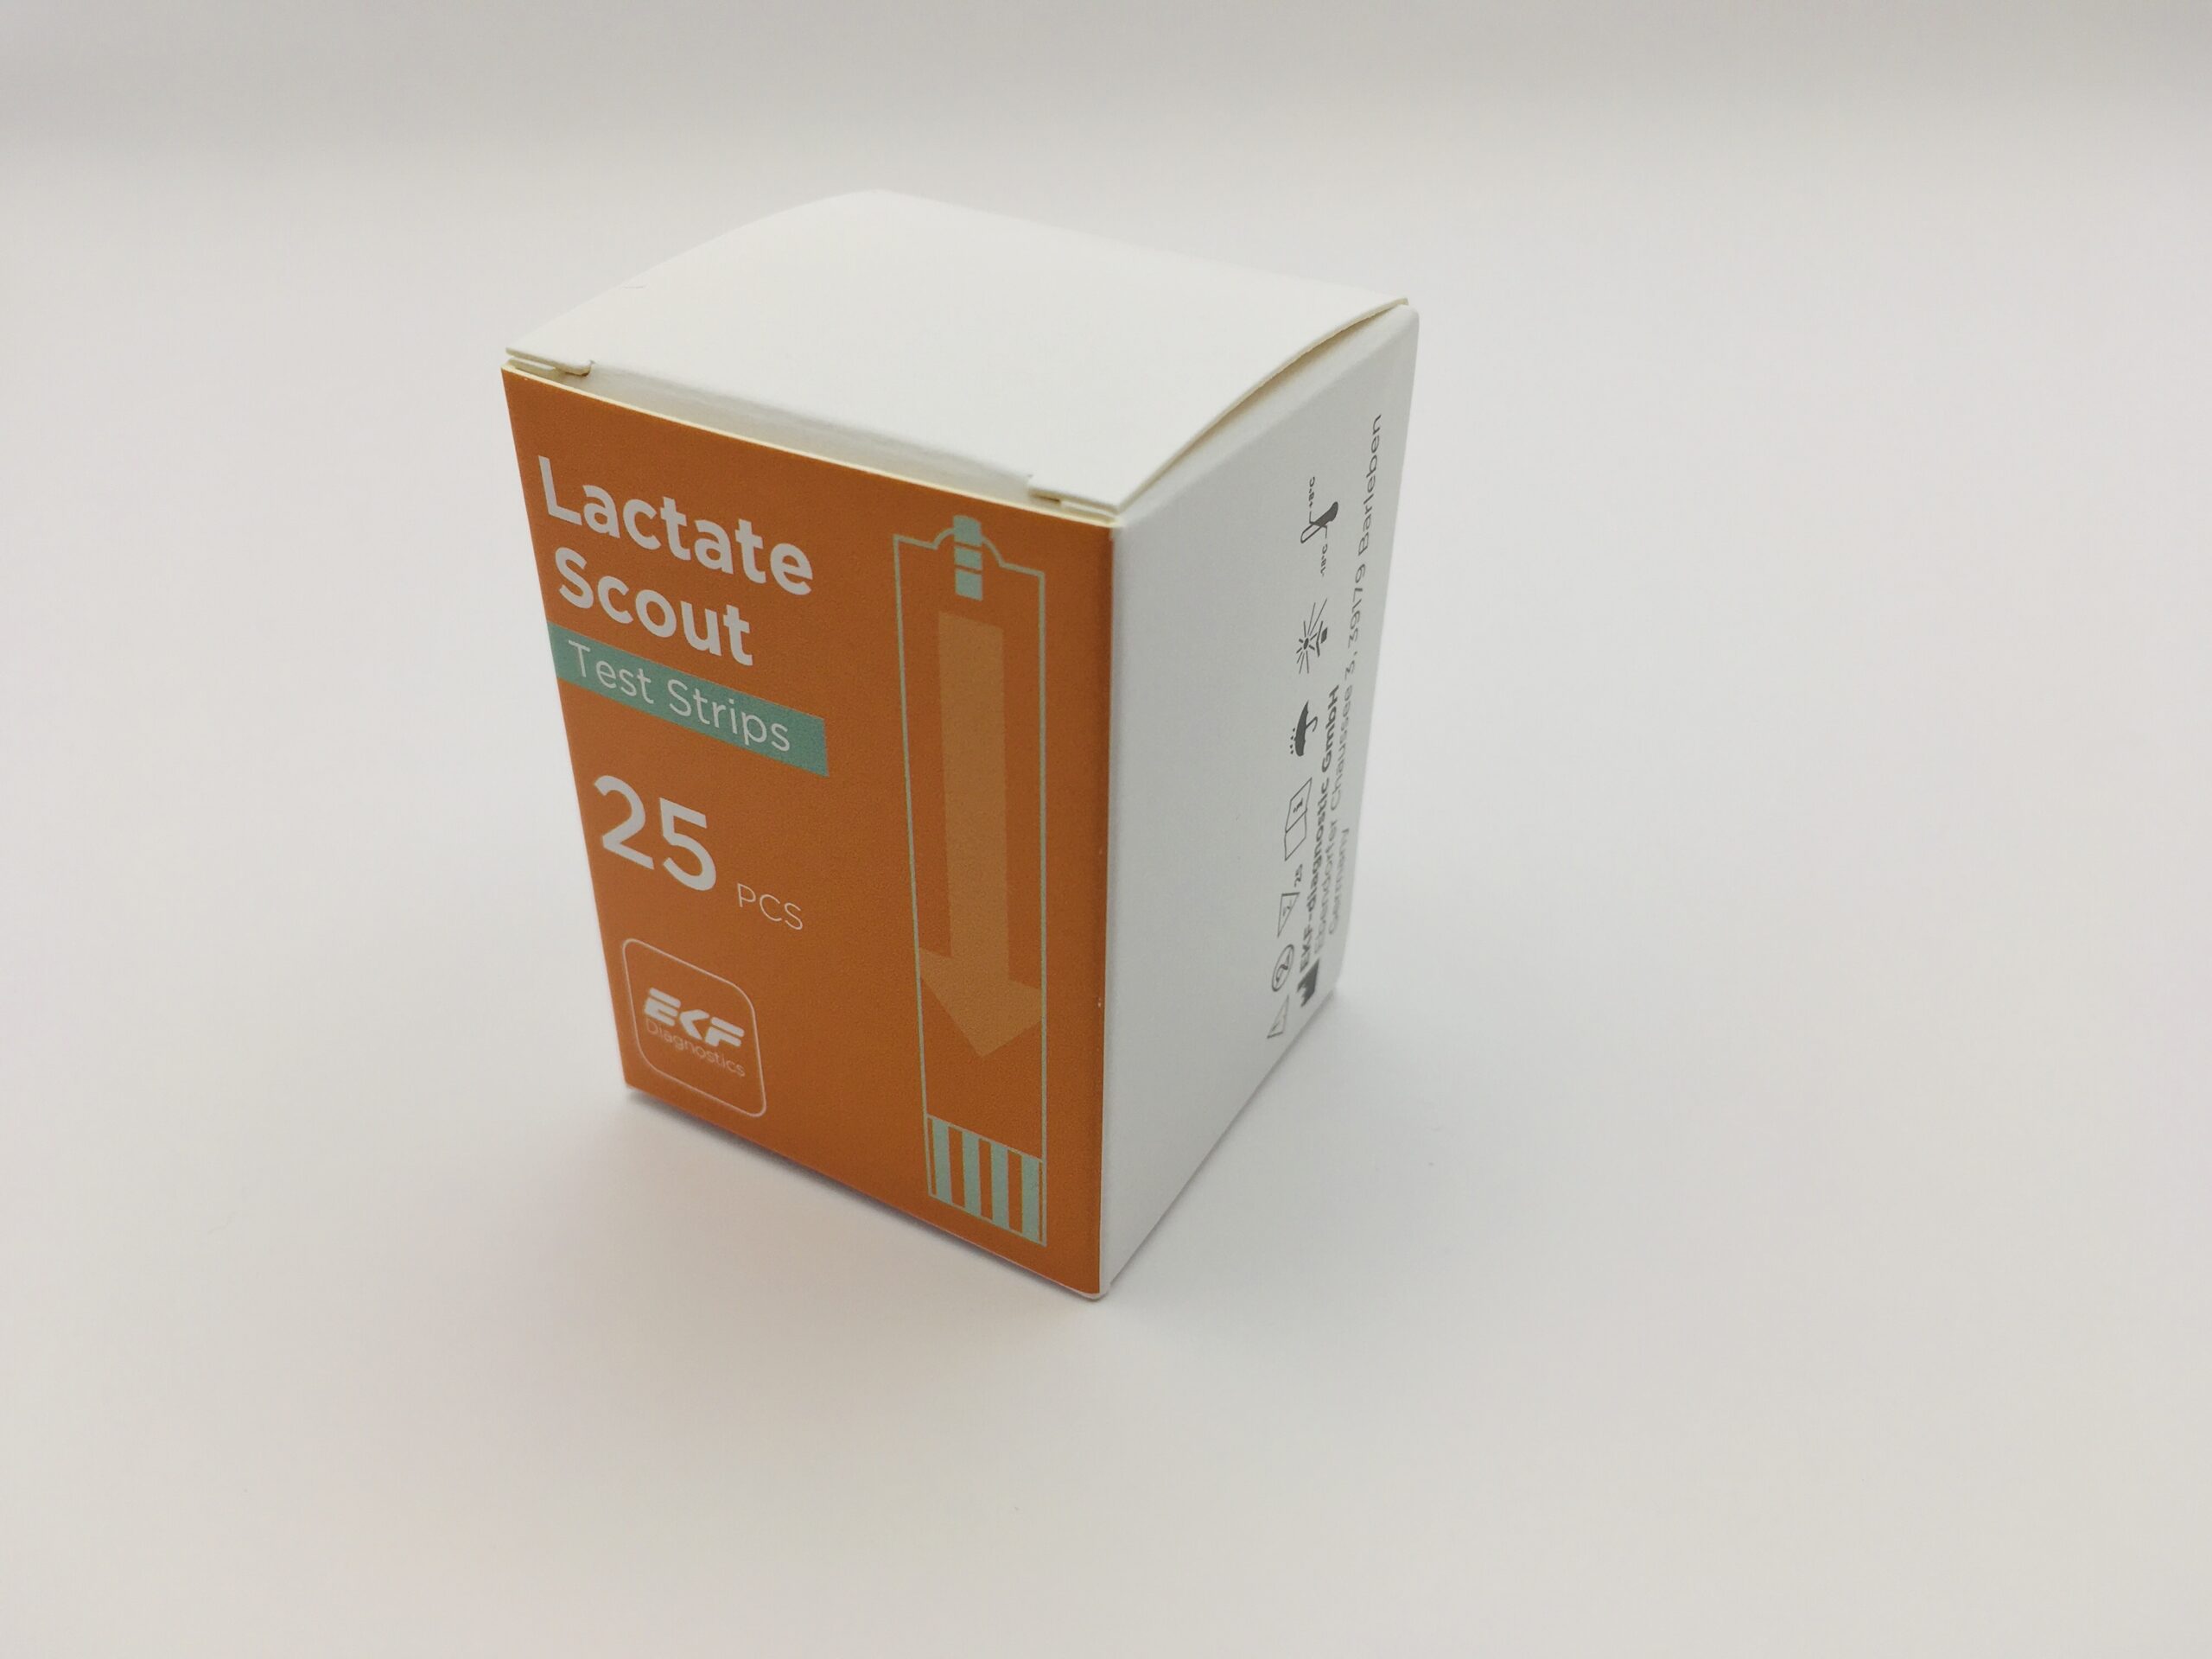 Box of 25 Lactate Sport Test Strips